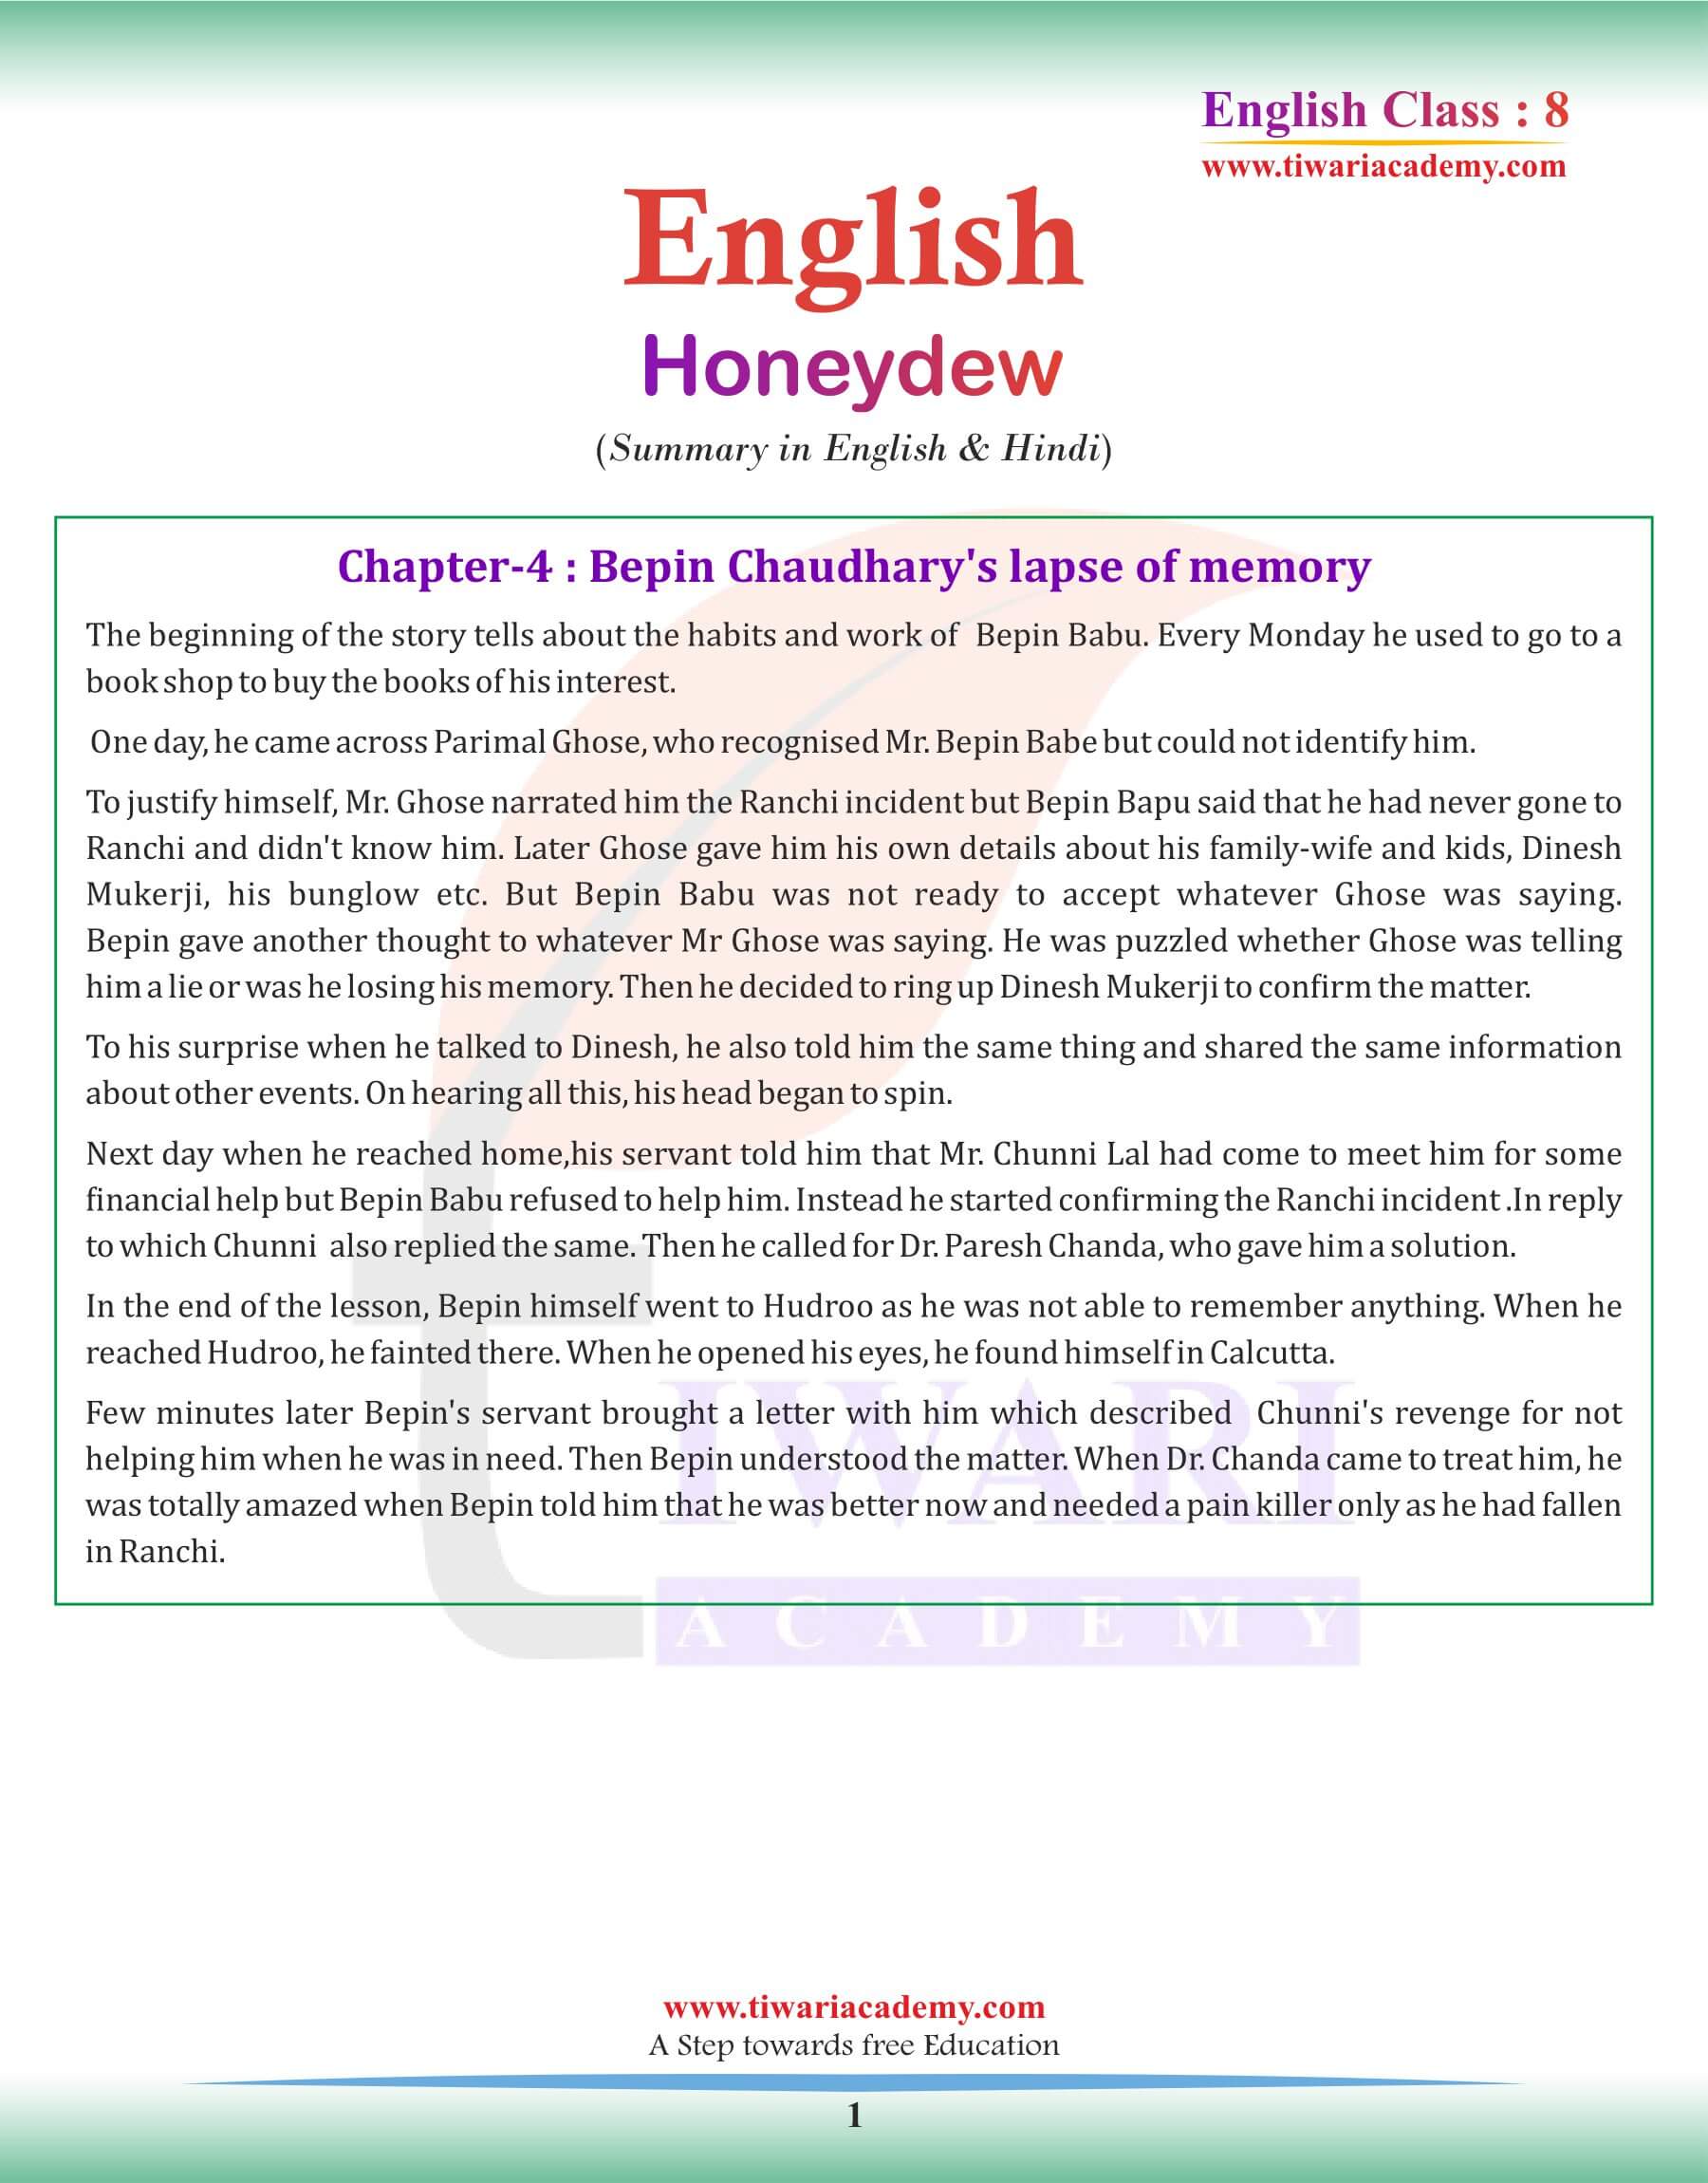 Class 8 English Chapter 4 Summary in English